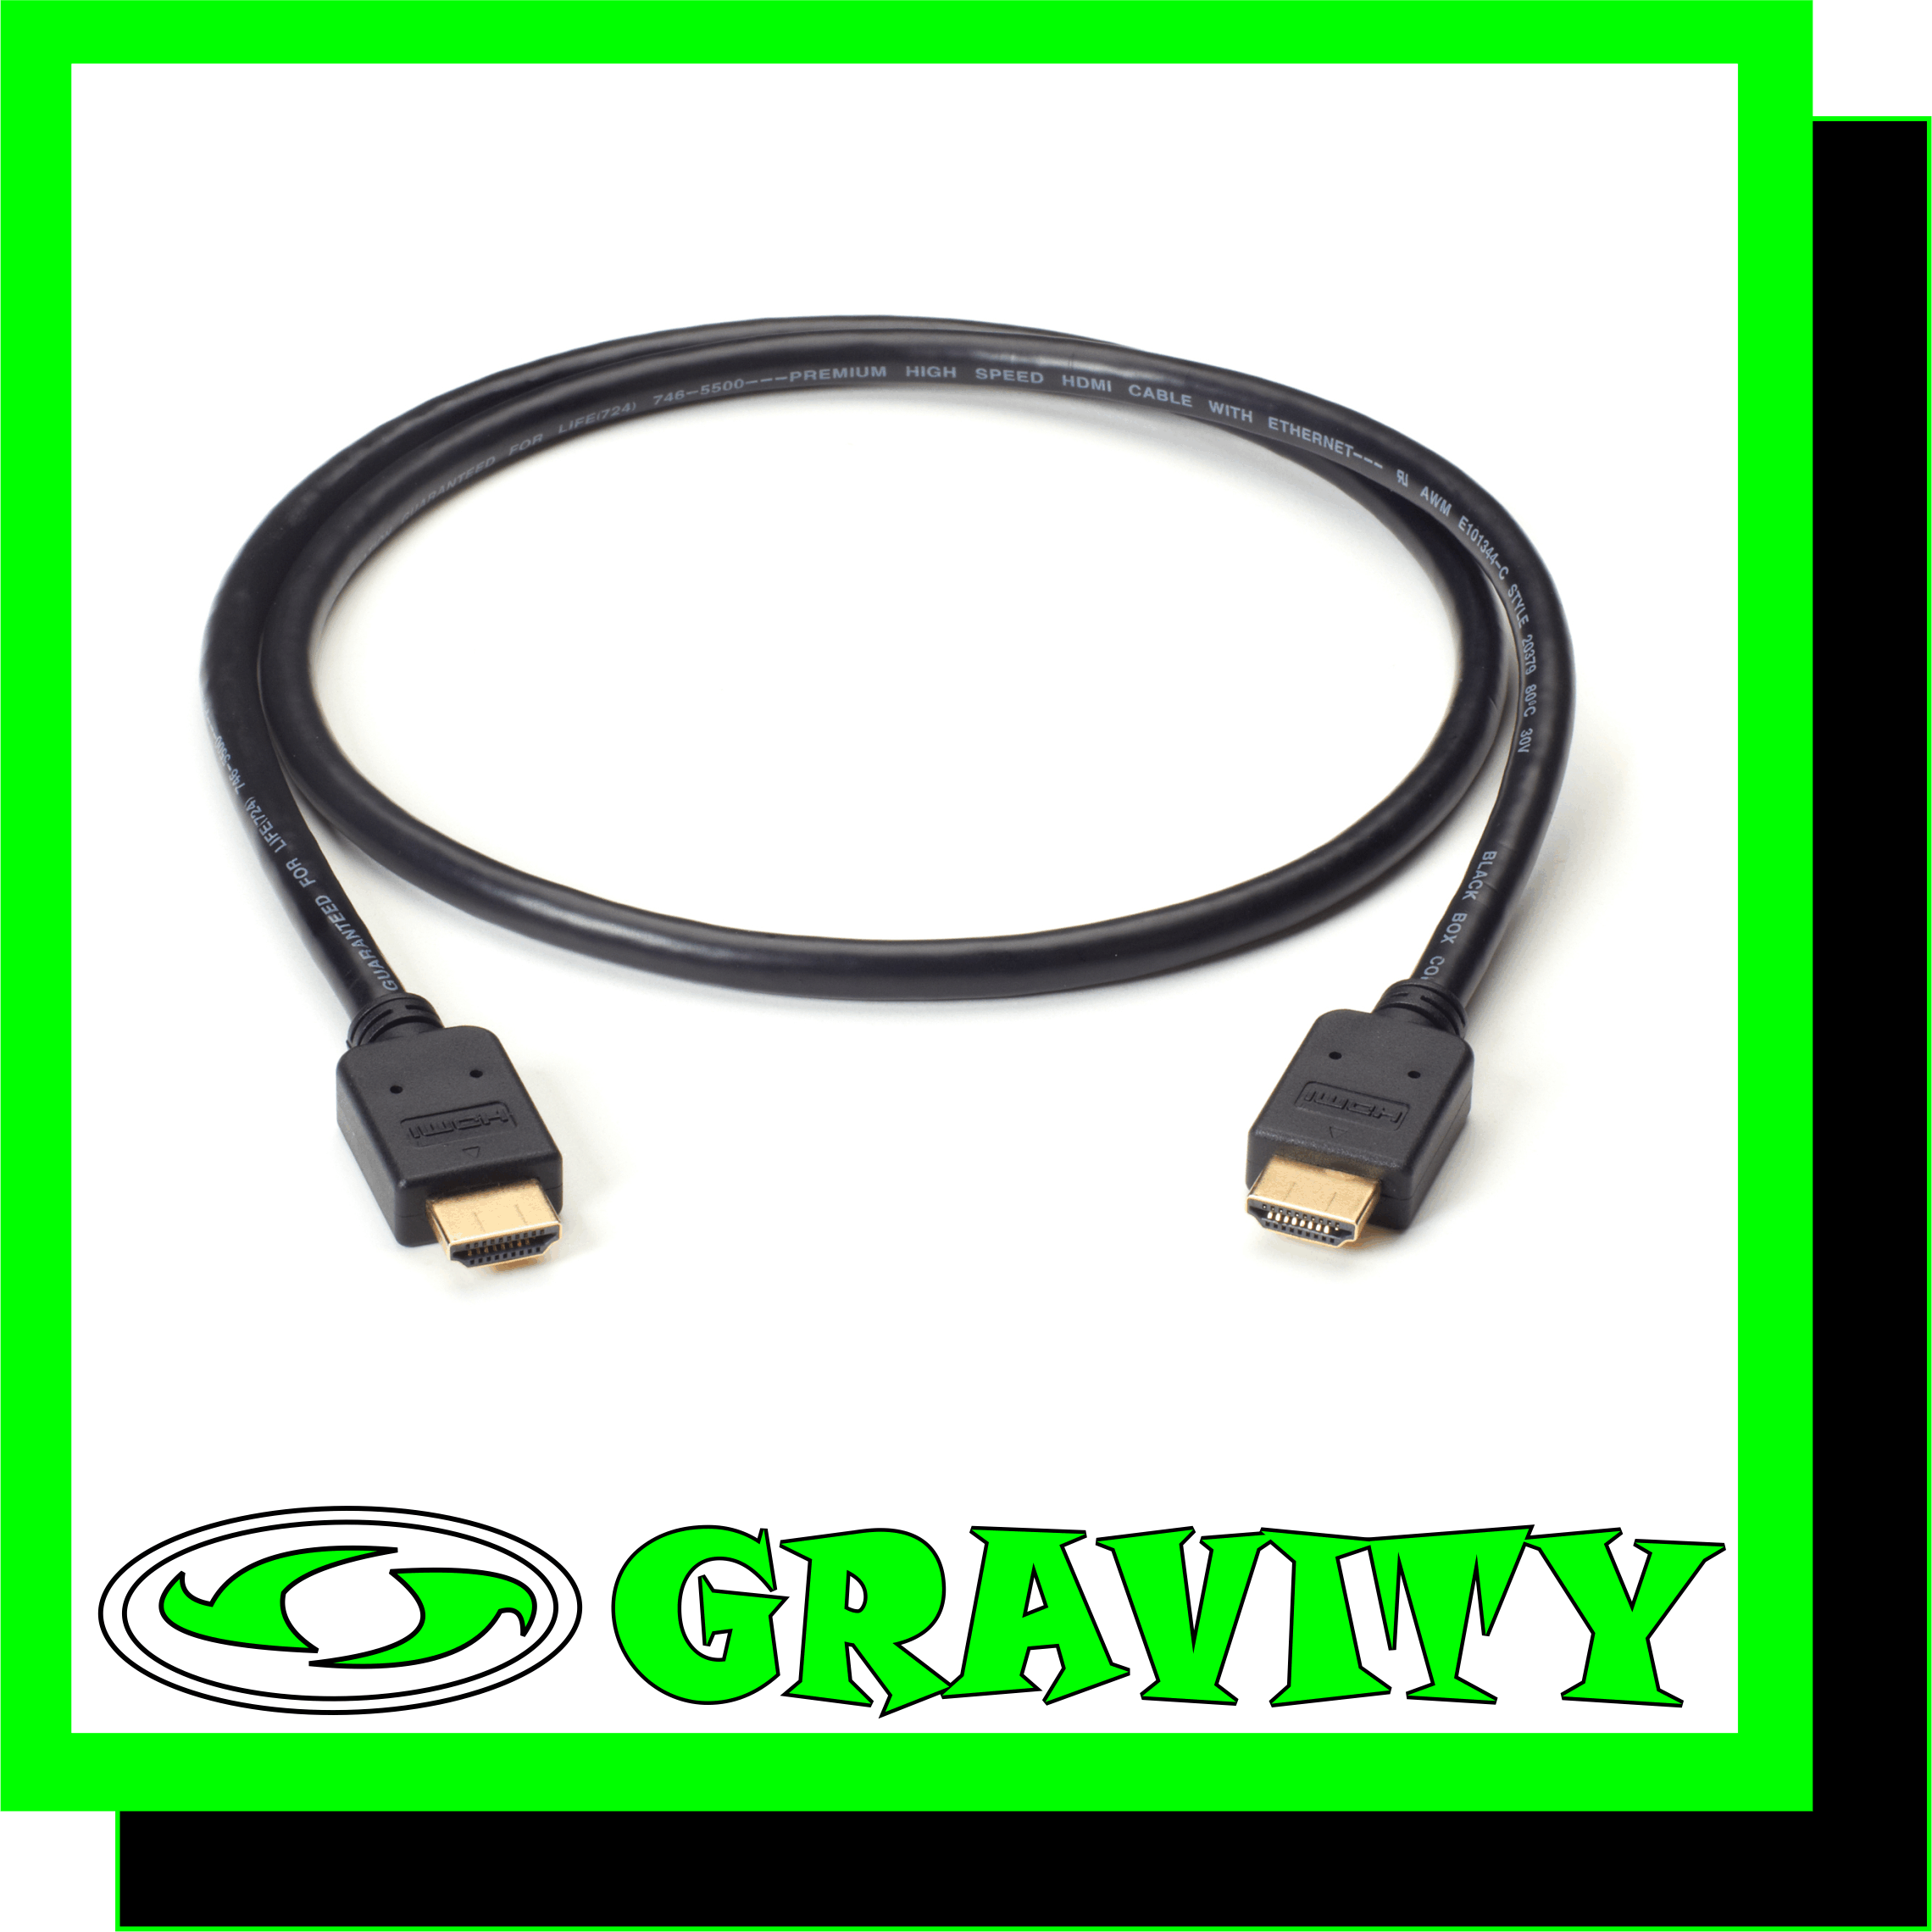 -High-Speed HDMI®is the recommended cable for 1080p and beyond, including advanced display technologies such as 4K, 3D, Deep Color, X.V. Color™, Dolby® True HD, and DTS-HD  Master Audio. -Because the cable has a dedicated data channel, you can network your HDMI Ethernet Channel enabled devices, such as Blu-ray players, gaming consoles, TVs, and more,  without a separate Ethernet cable. -Certified Category 1m HDMI.  Get high-bandwidth transmissions of 340 MHz or up to 10.2 Gbps. -HDMI is the recommended cable for 1080p video. -Supports all the latest display technologies such as 2K x 4K resolution, 3D, and Deep Color including Ethernet. -Connect Blu-ray™ players, laptops, HDTV receivers, digital TVs, DVDs, and other equipment with HDMI interfaces. -Double shielding prevents signal loss and screen ghosting for maximum video performance.